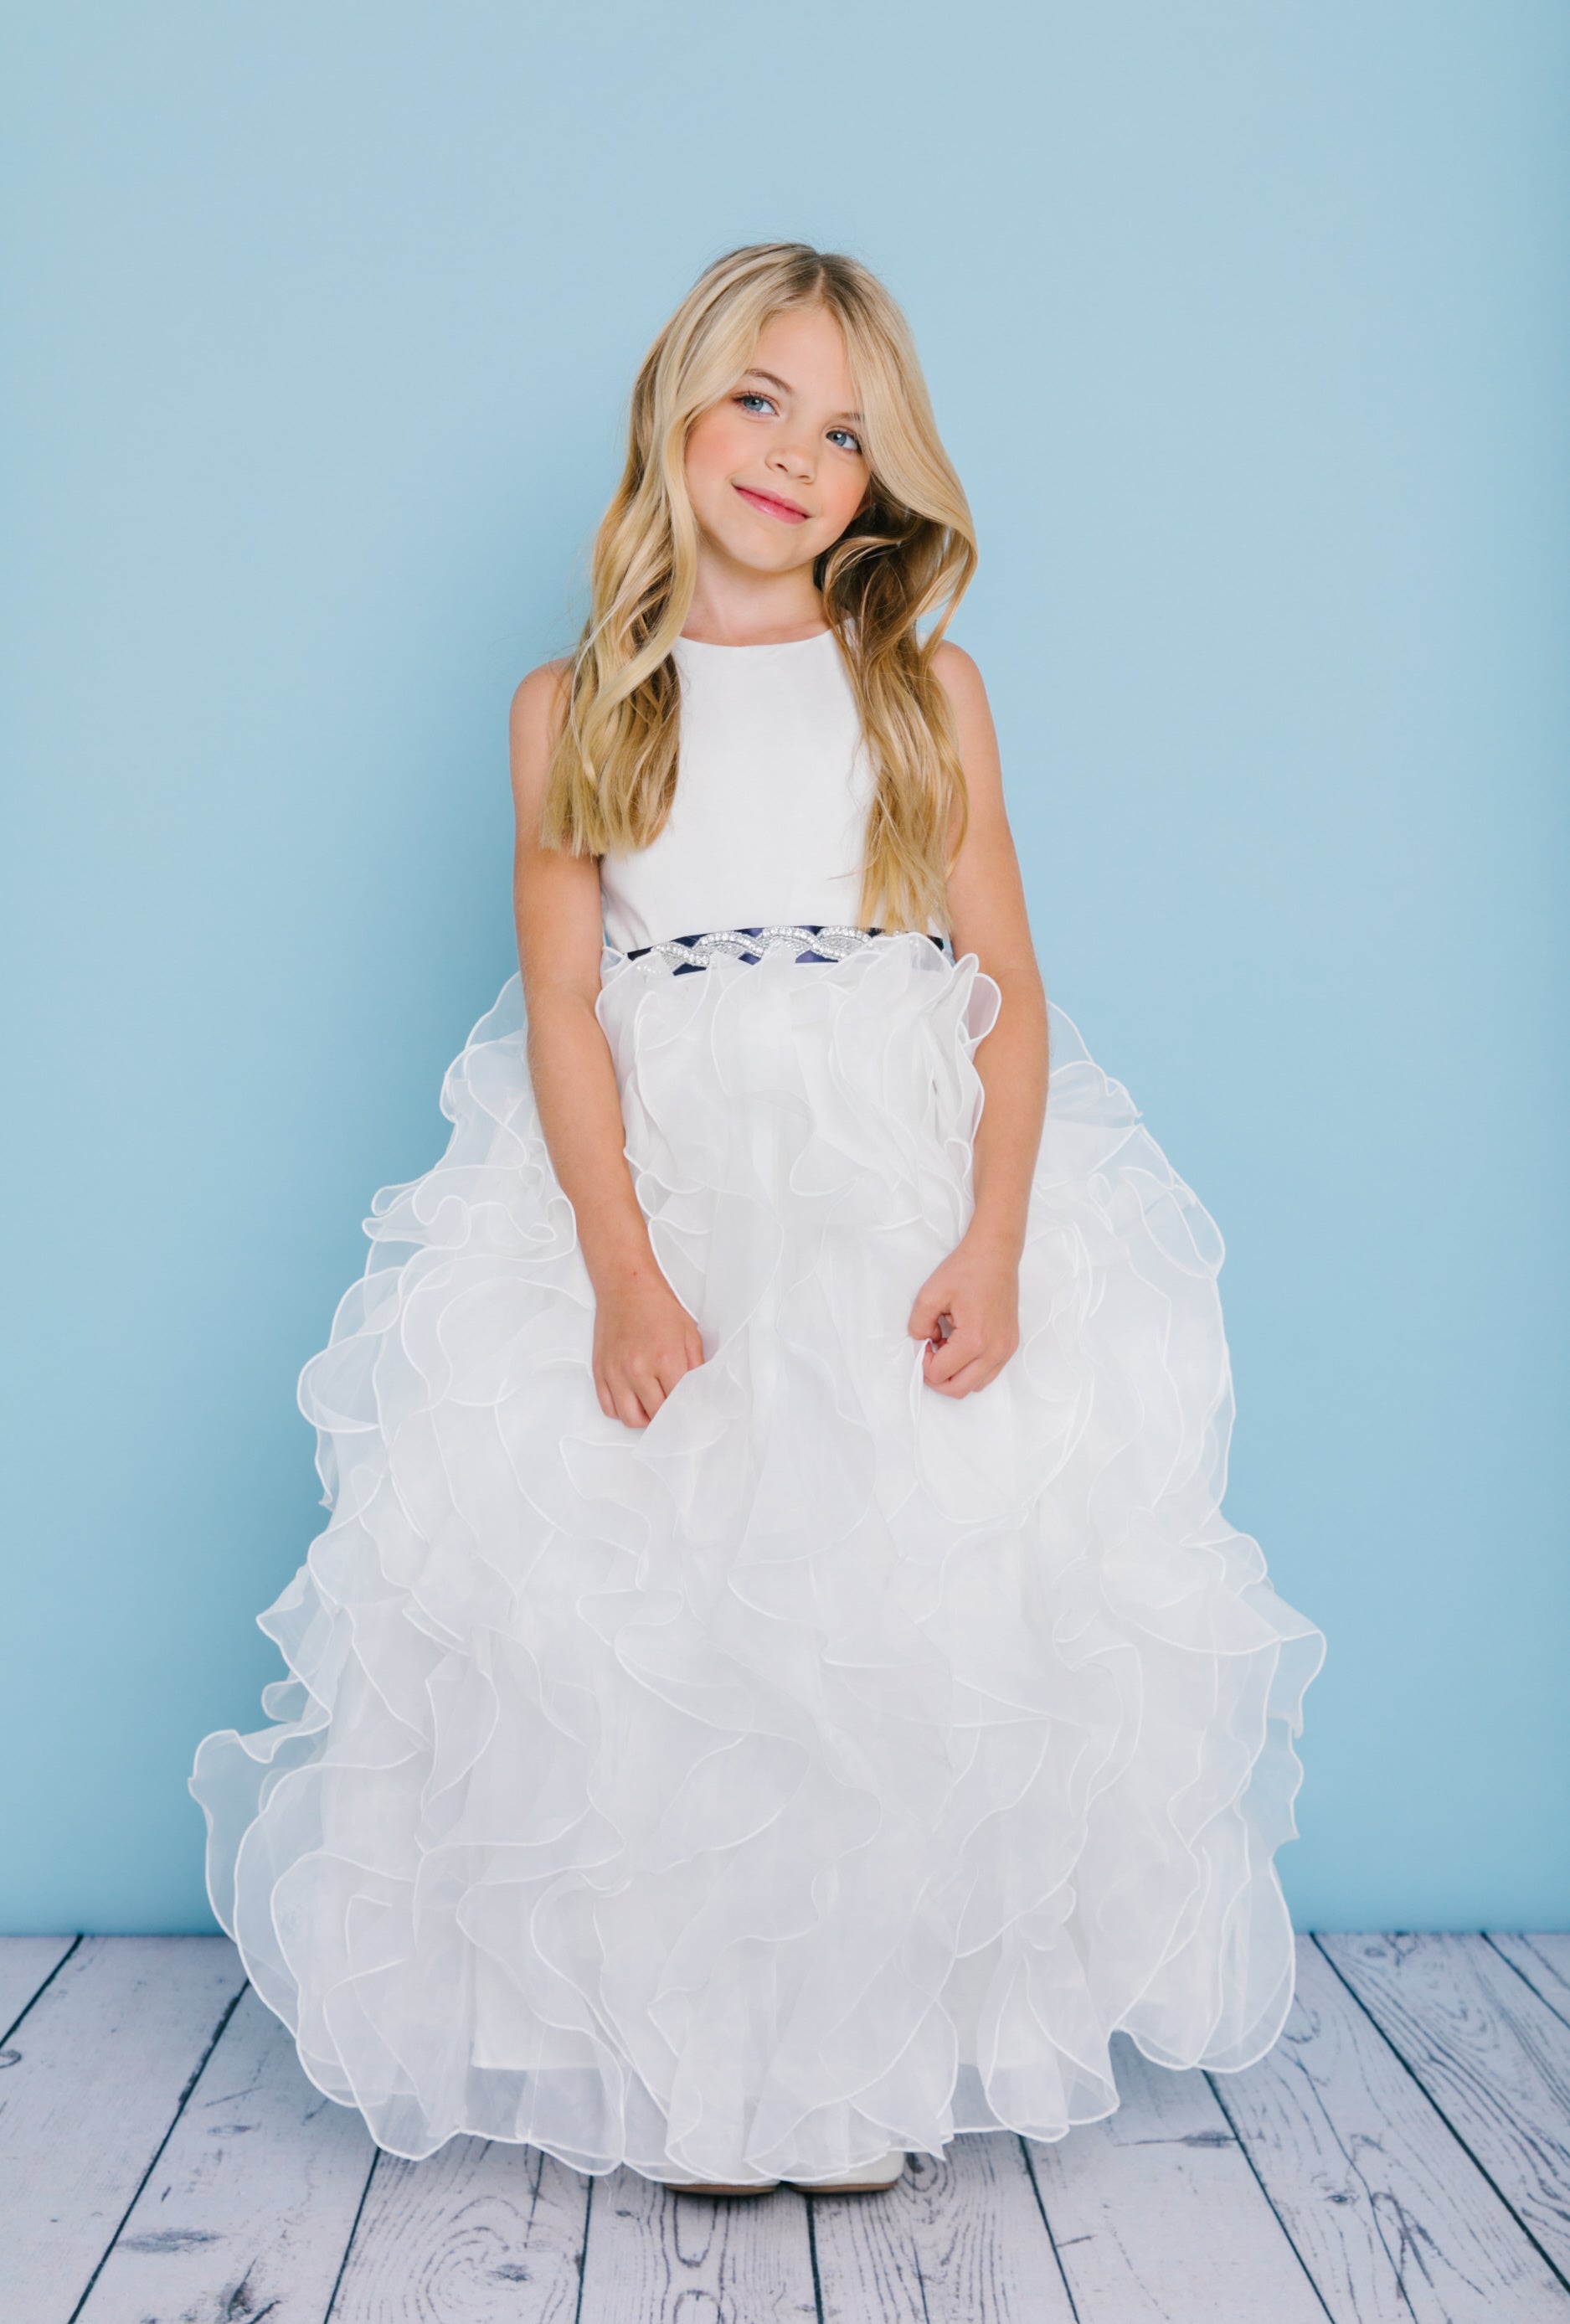 Rosebud Fashions Style 5122 is a ball gown with a satin bodice and organza ruffled skirt. The waist is accented by a bling ribbon that ties to a bow in the back. Satin buttons cover the zipper. Flower Girl Dress * First Communion Gown.  Available Sizes: 2,4,6,8,10,12  Available Colors: Ivory, White  Fabric is Satin and Organza